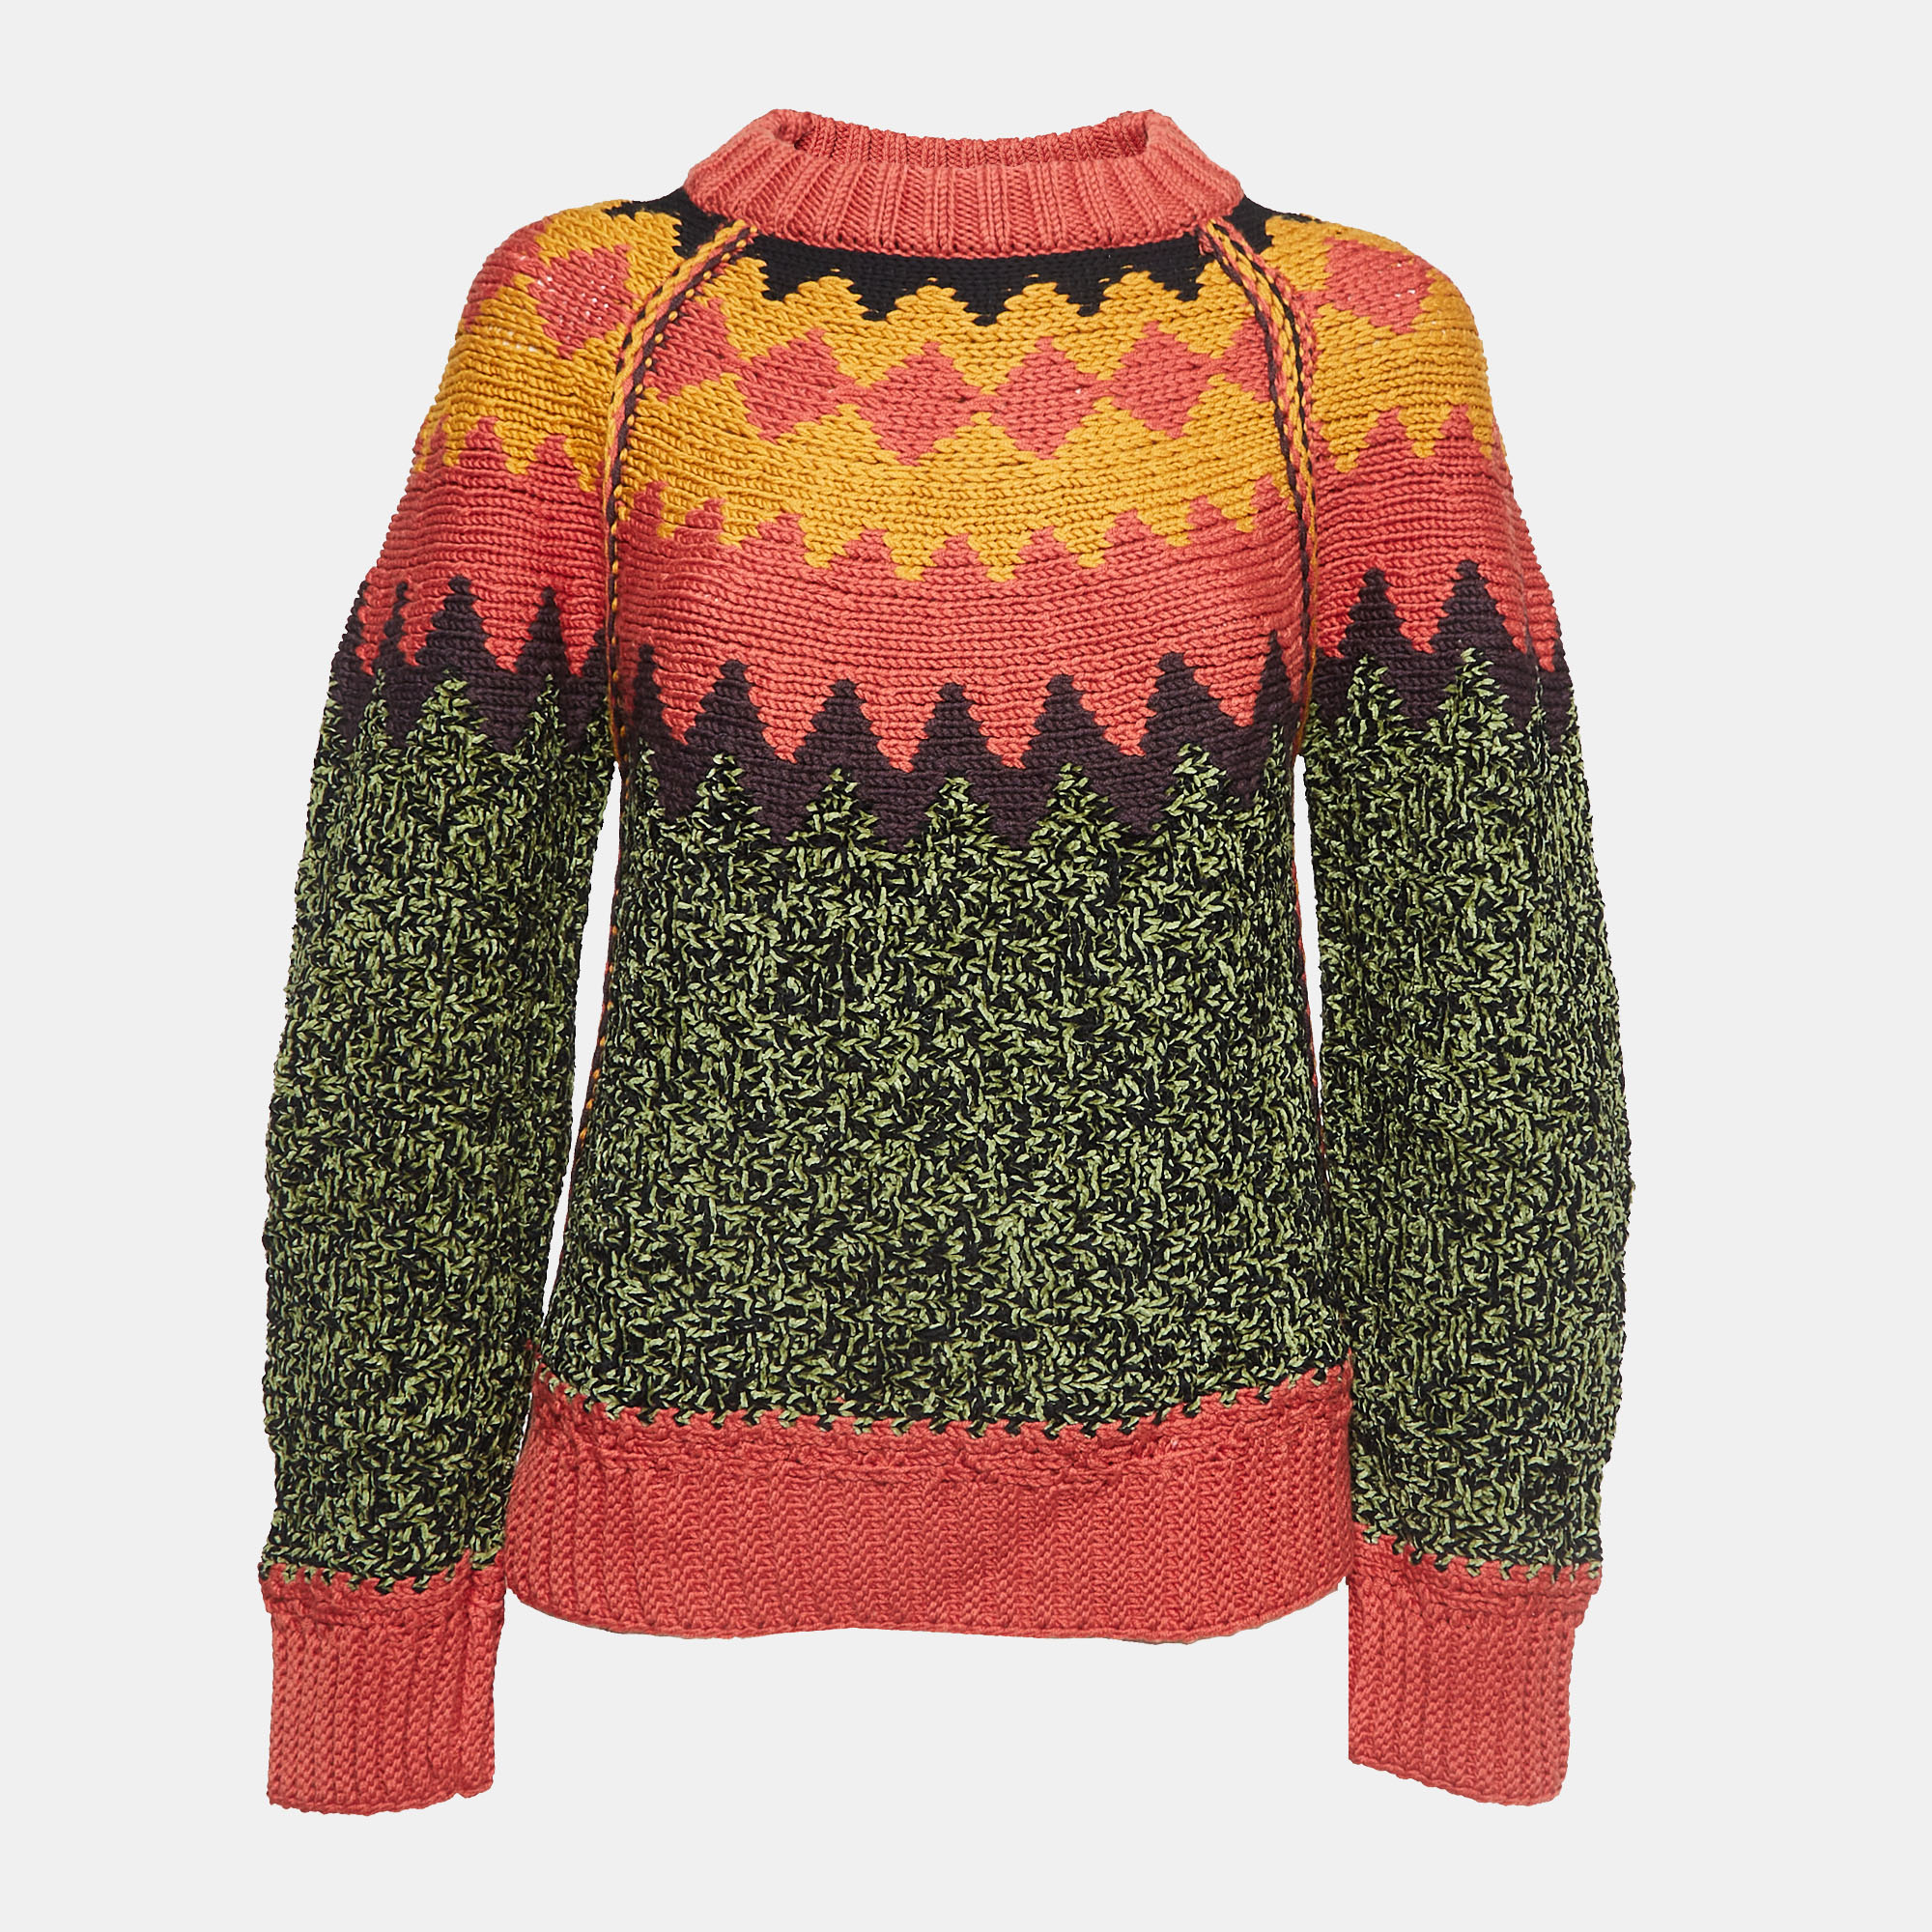 

M Missoni Multicolor Patterned Wool-Blend Knit Sweater